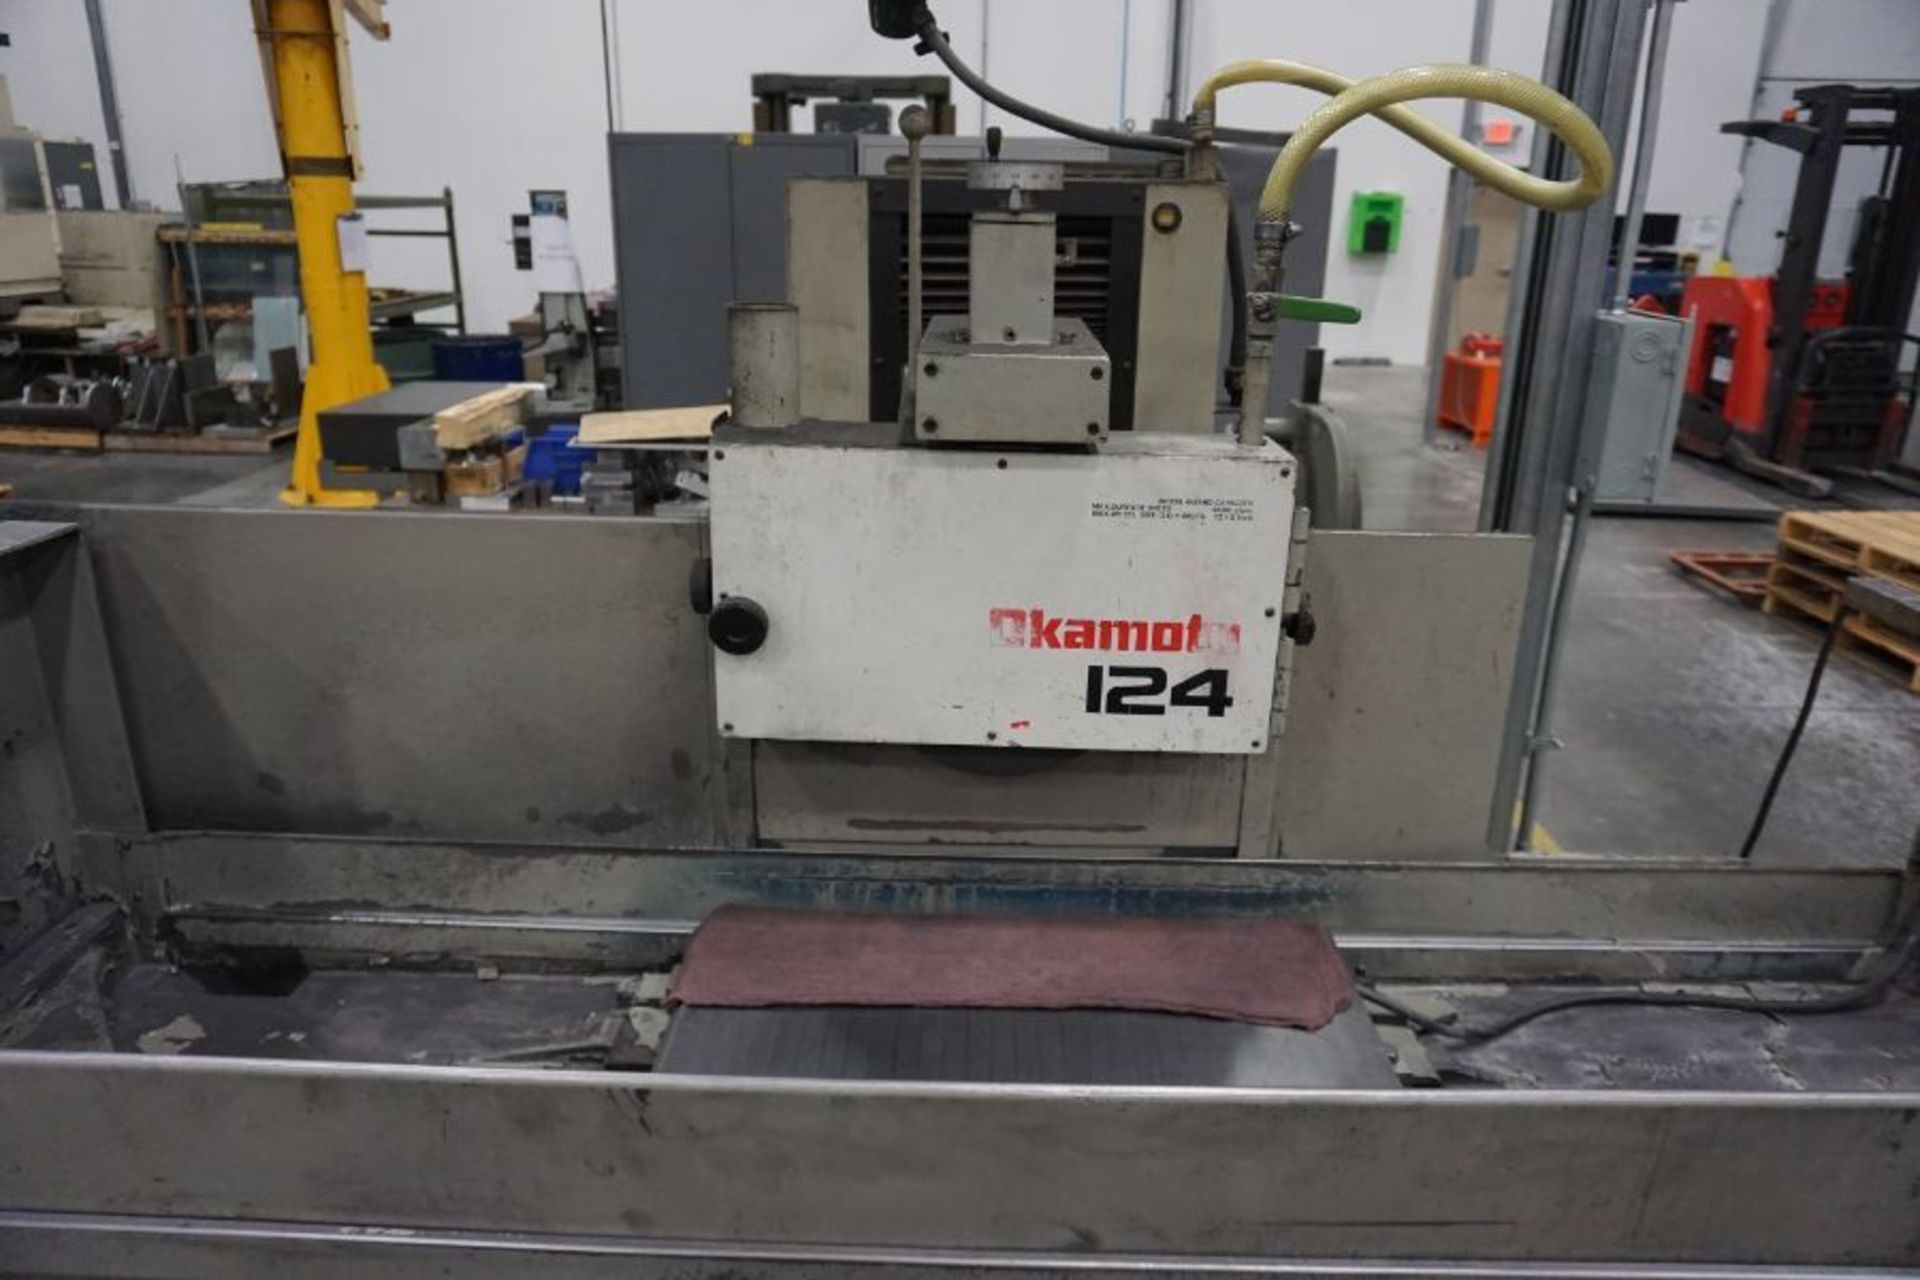 Okamoto ACC-124DX Automatic Surface Grinder, s/n 63273 - Image 4 of 6